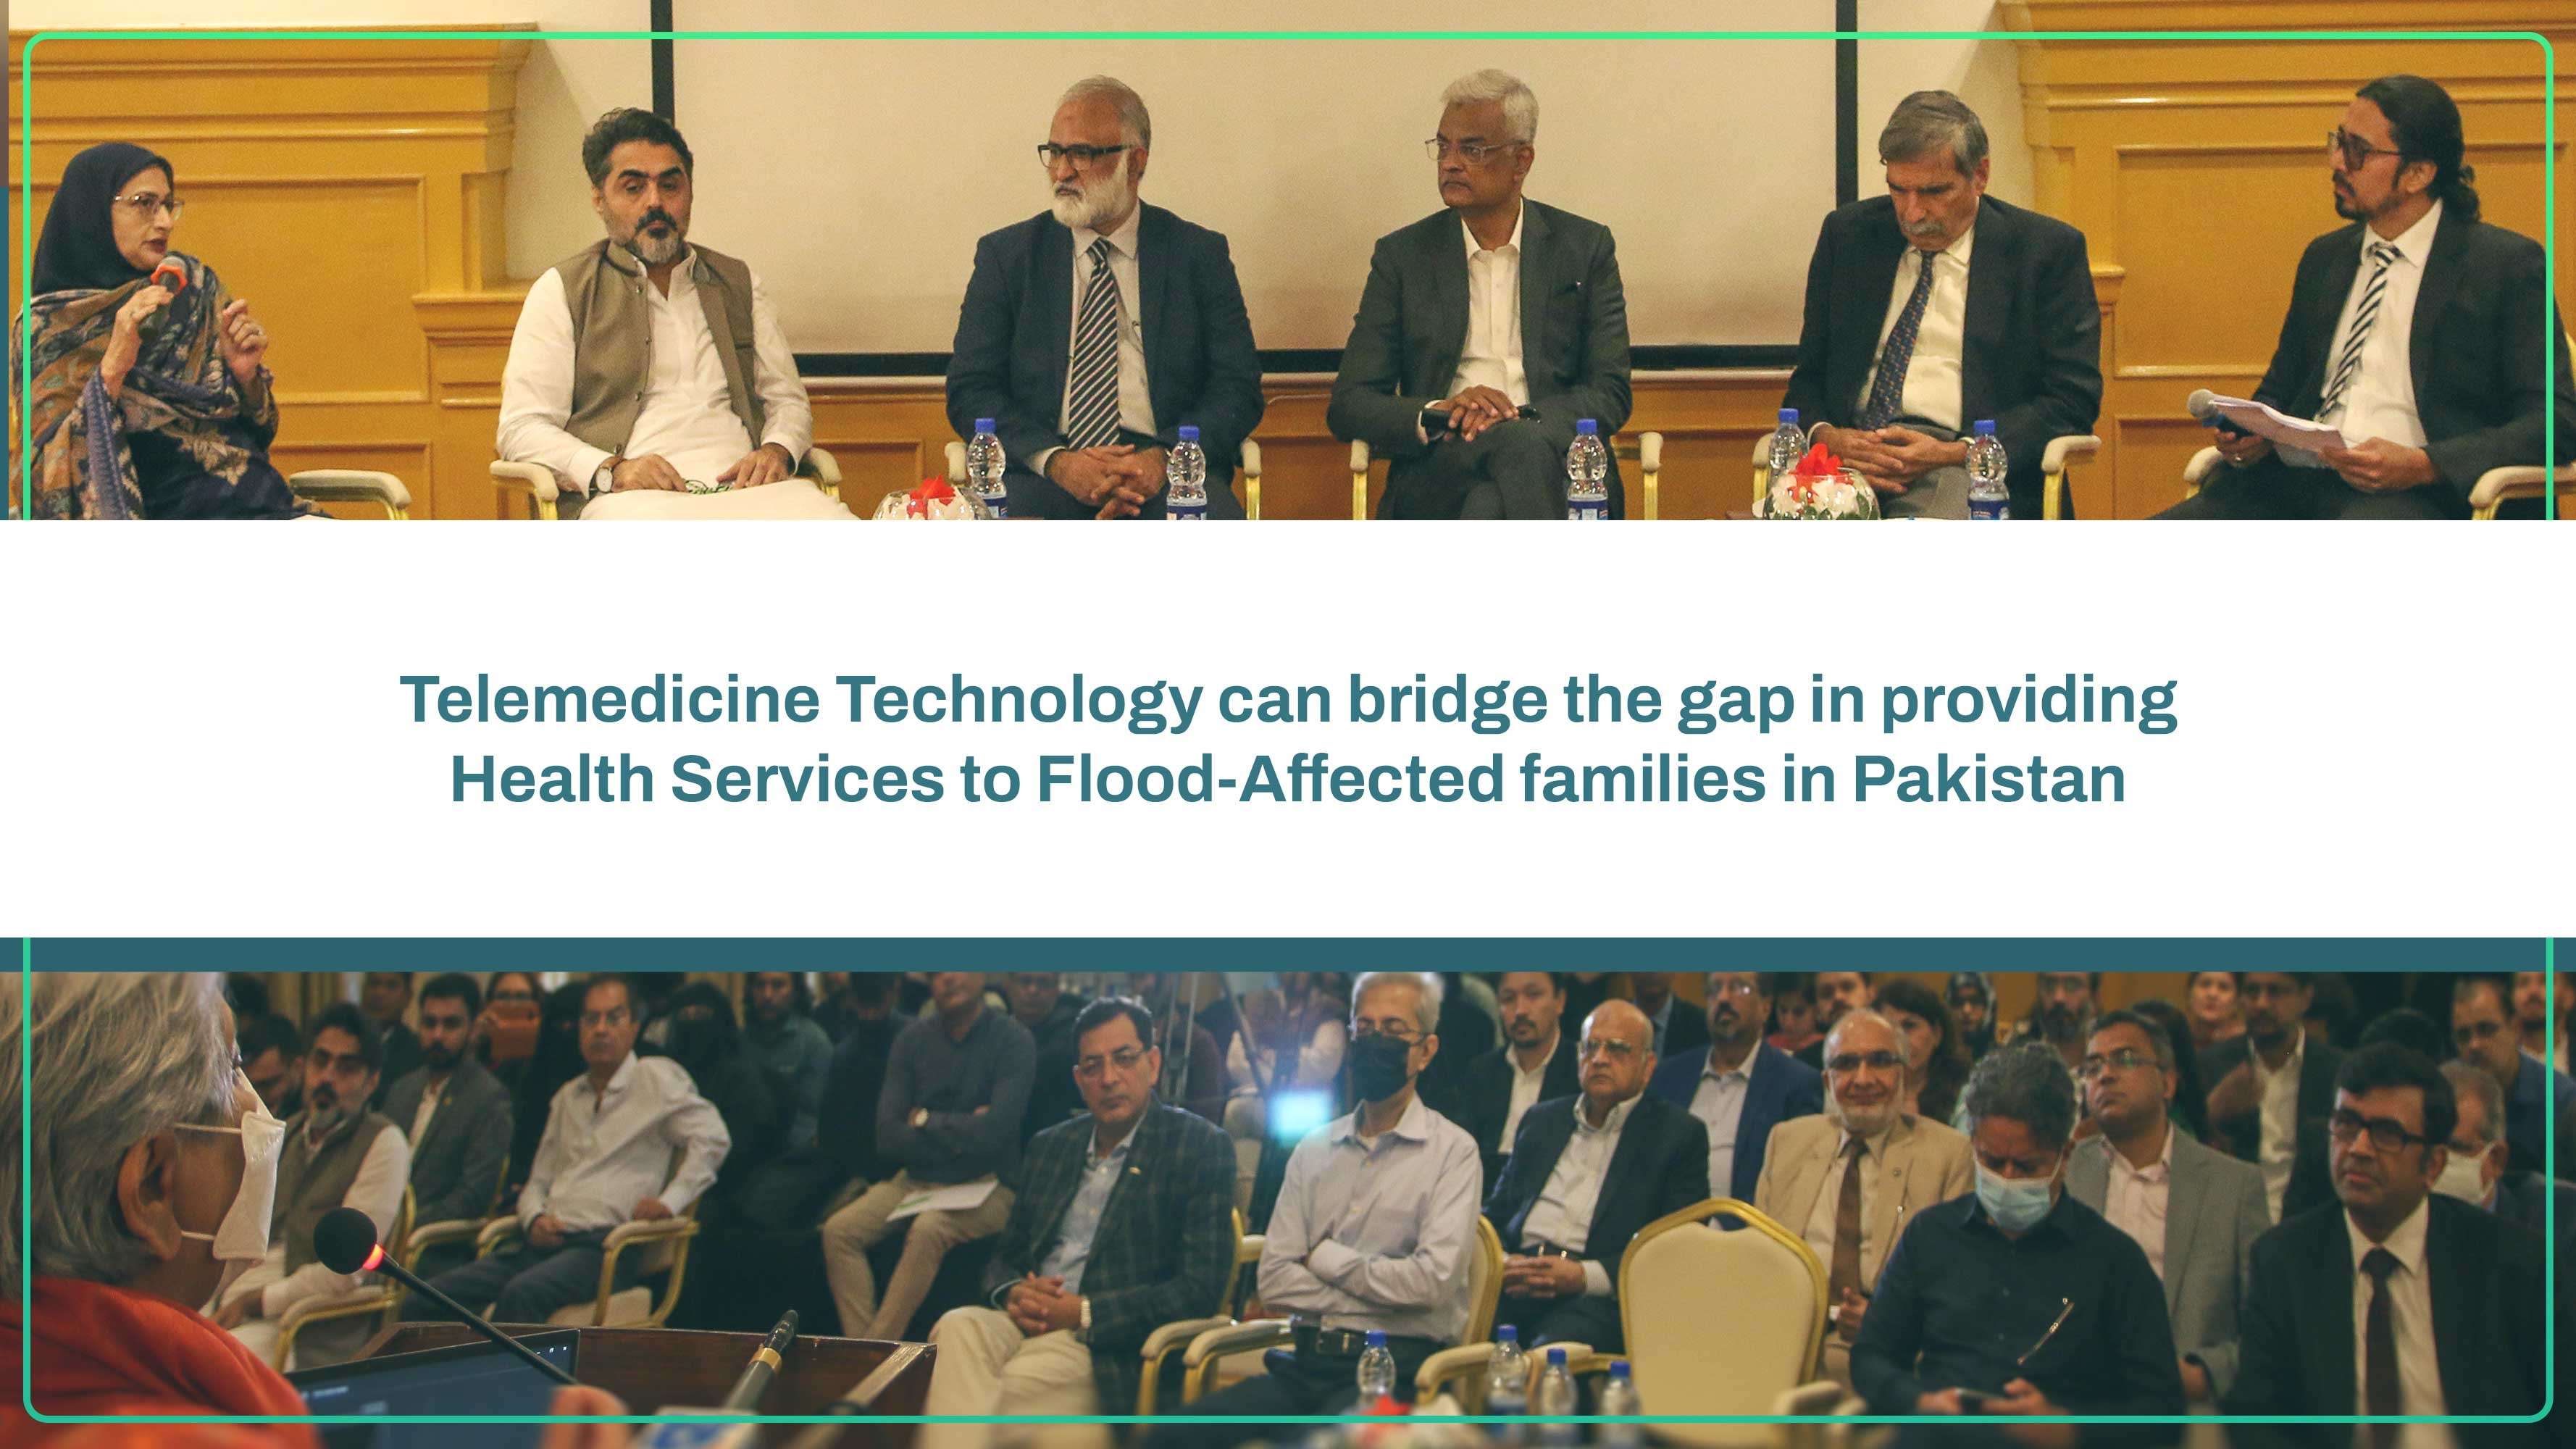 Telemedicine Technology can bridge the gap in providing Health Services to Flood-Affected families in Pakistan